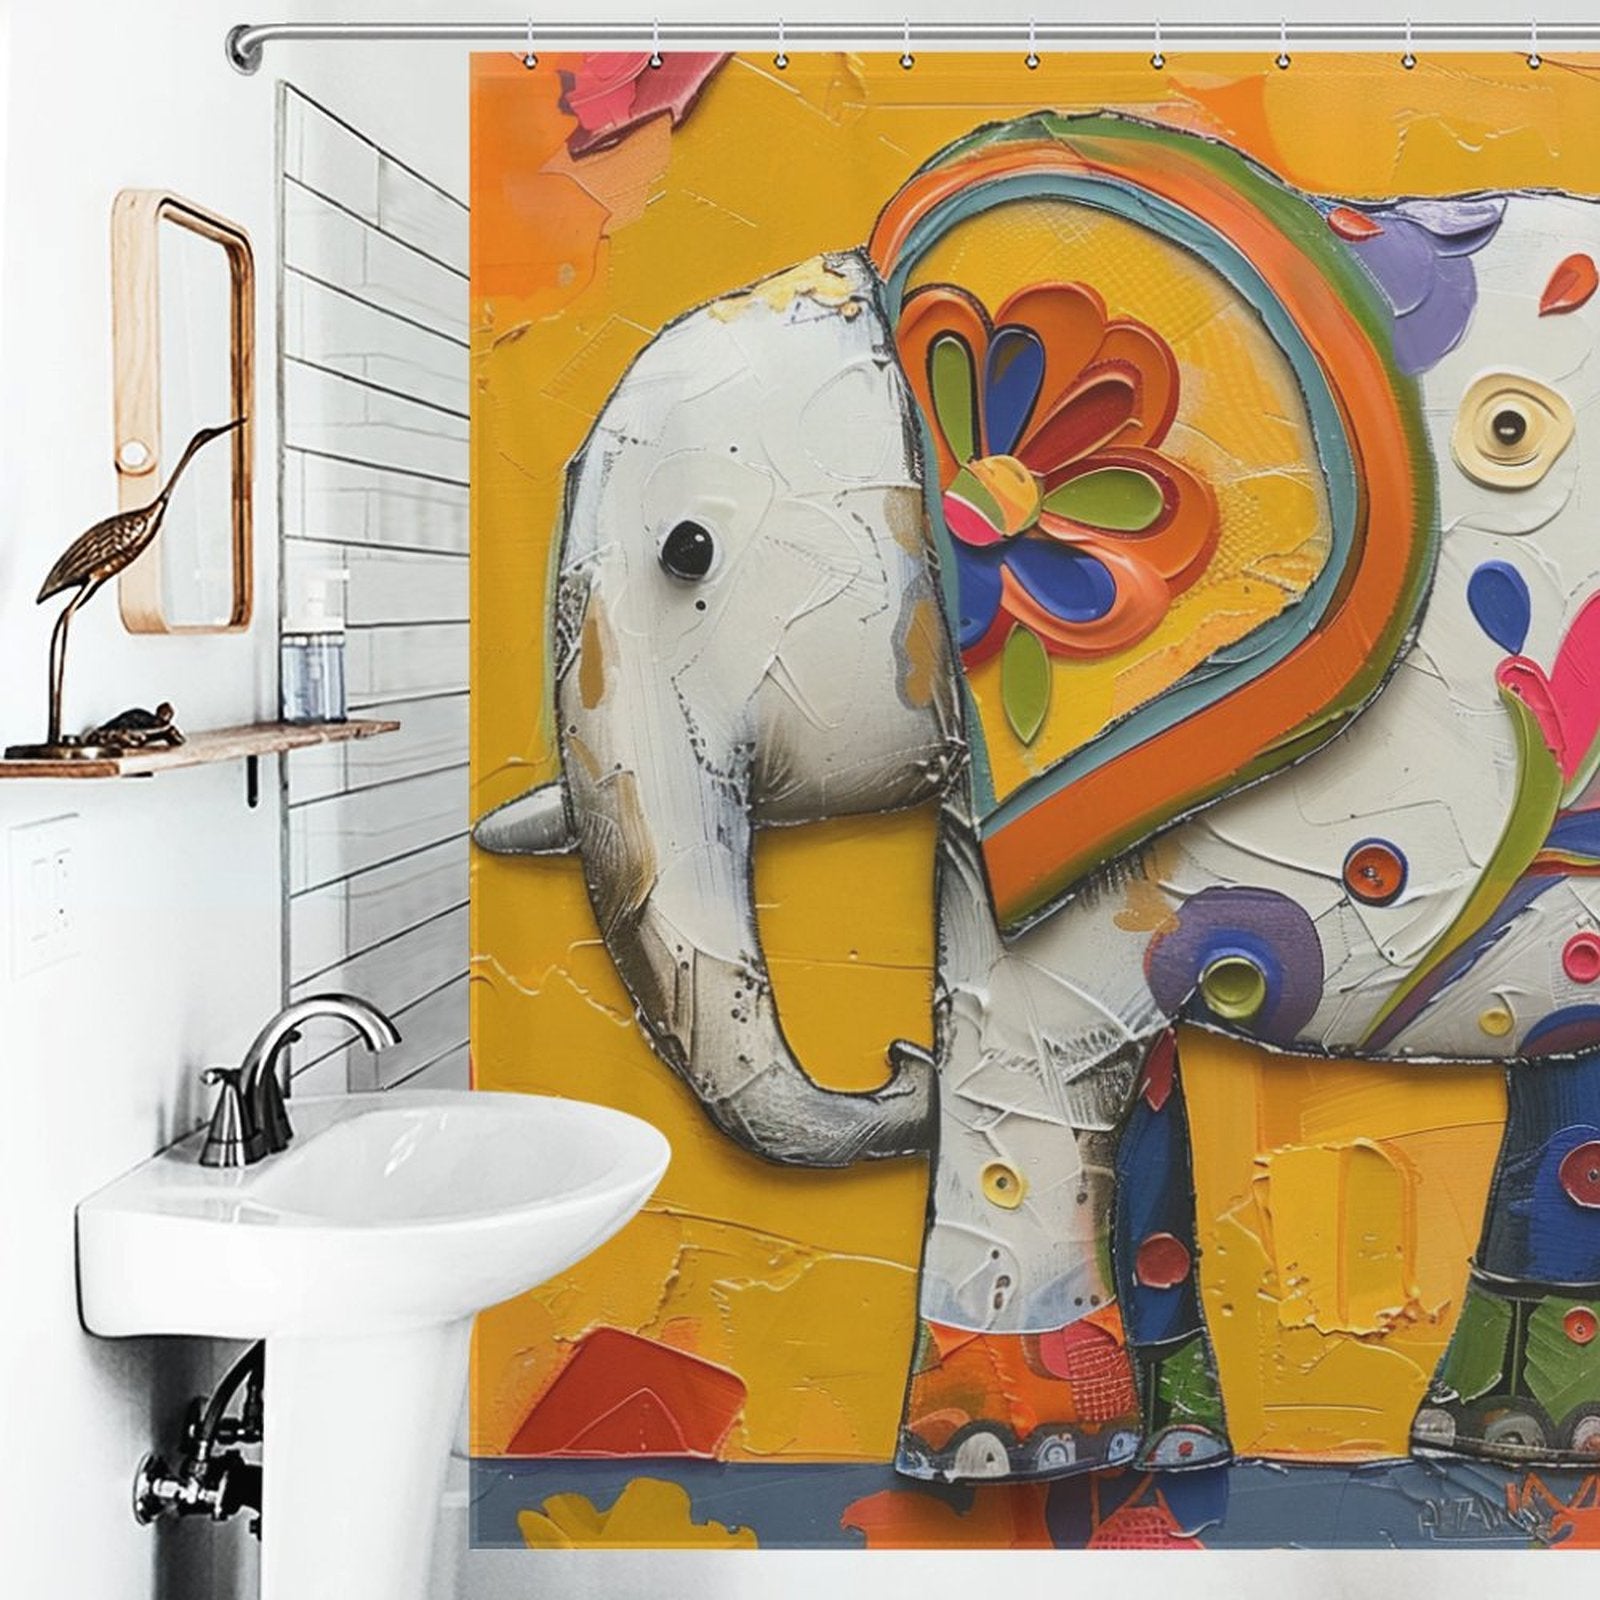 Bathroom with a white sink and modern faucet. A Cute Baby Elephant Shower Curtain-Cottoncat by Cotton Cat featuring an abstract baby elephant design is prominently hung. A small bird sculpture is placed on a wooden shelf above the sink, adding a charming touch to the bathroom decor.